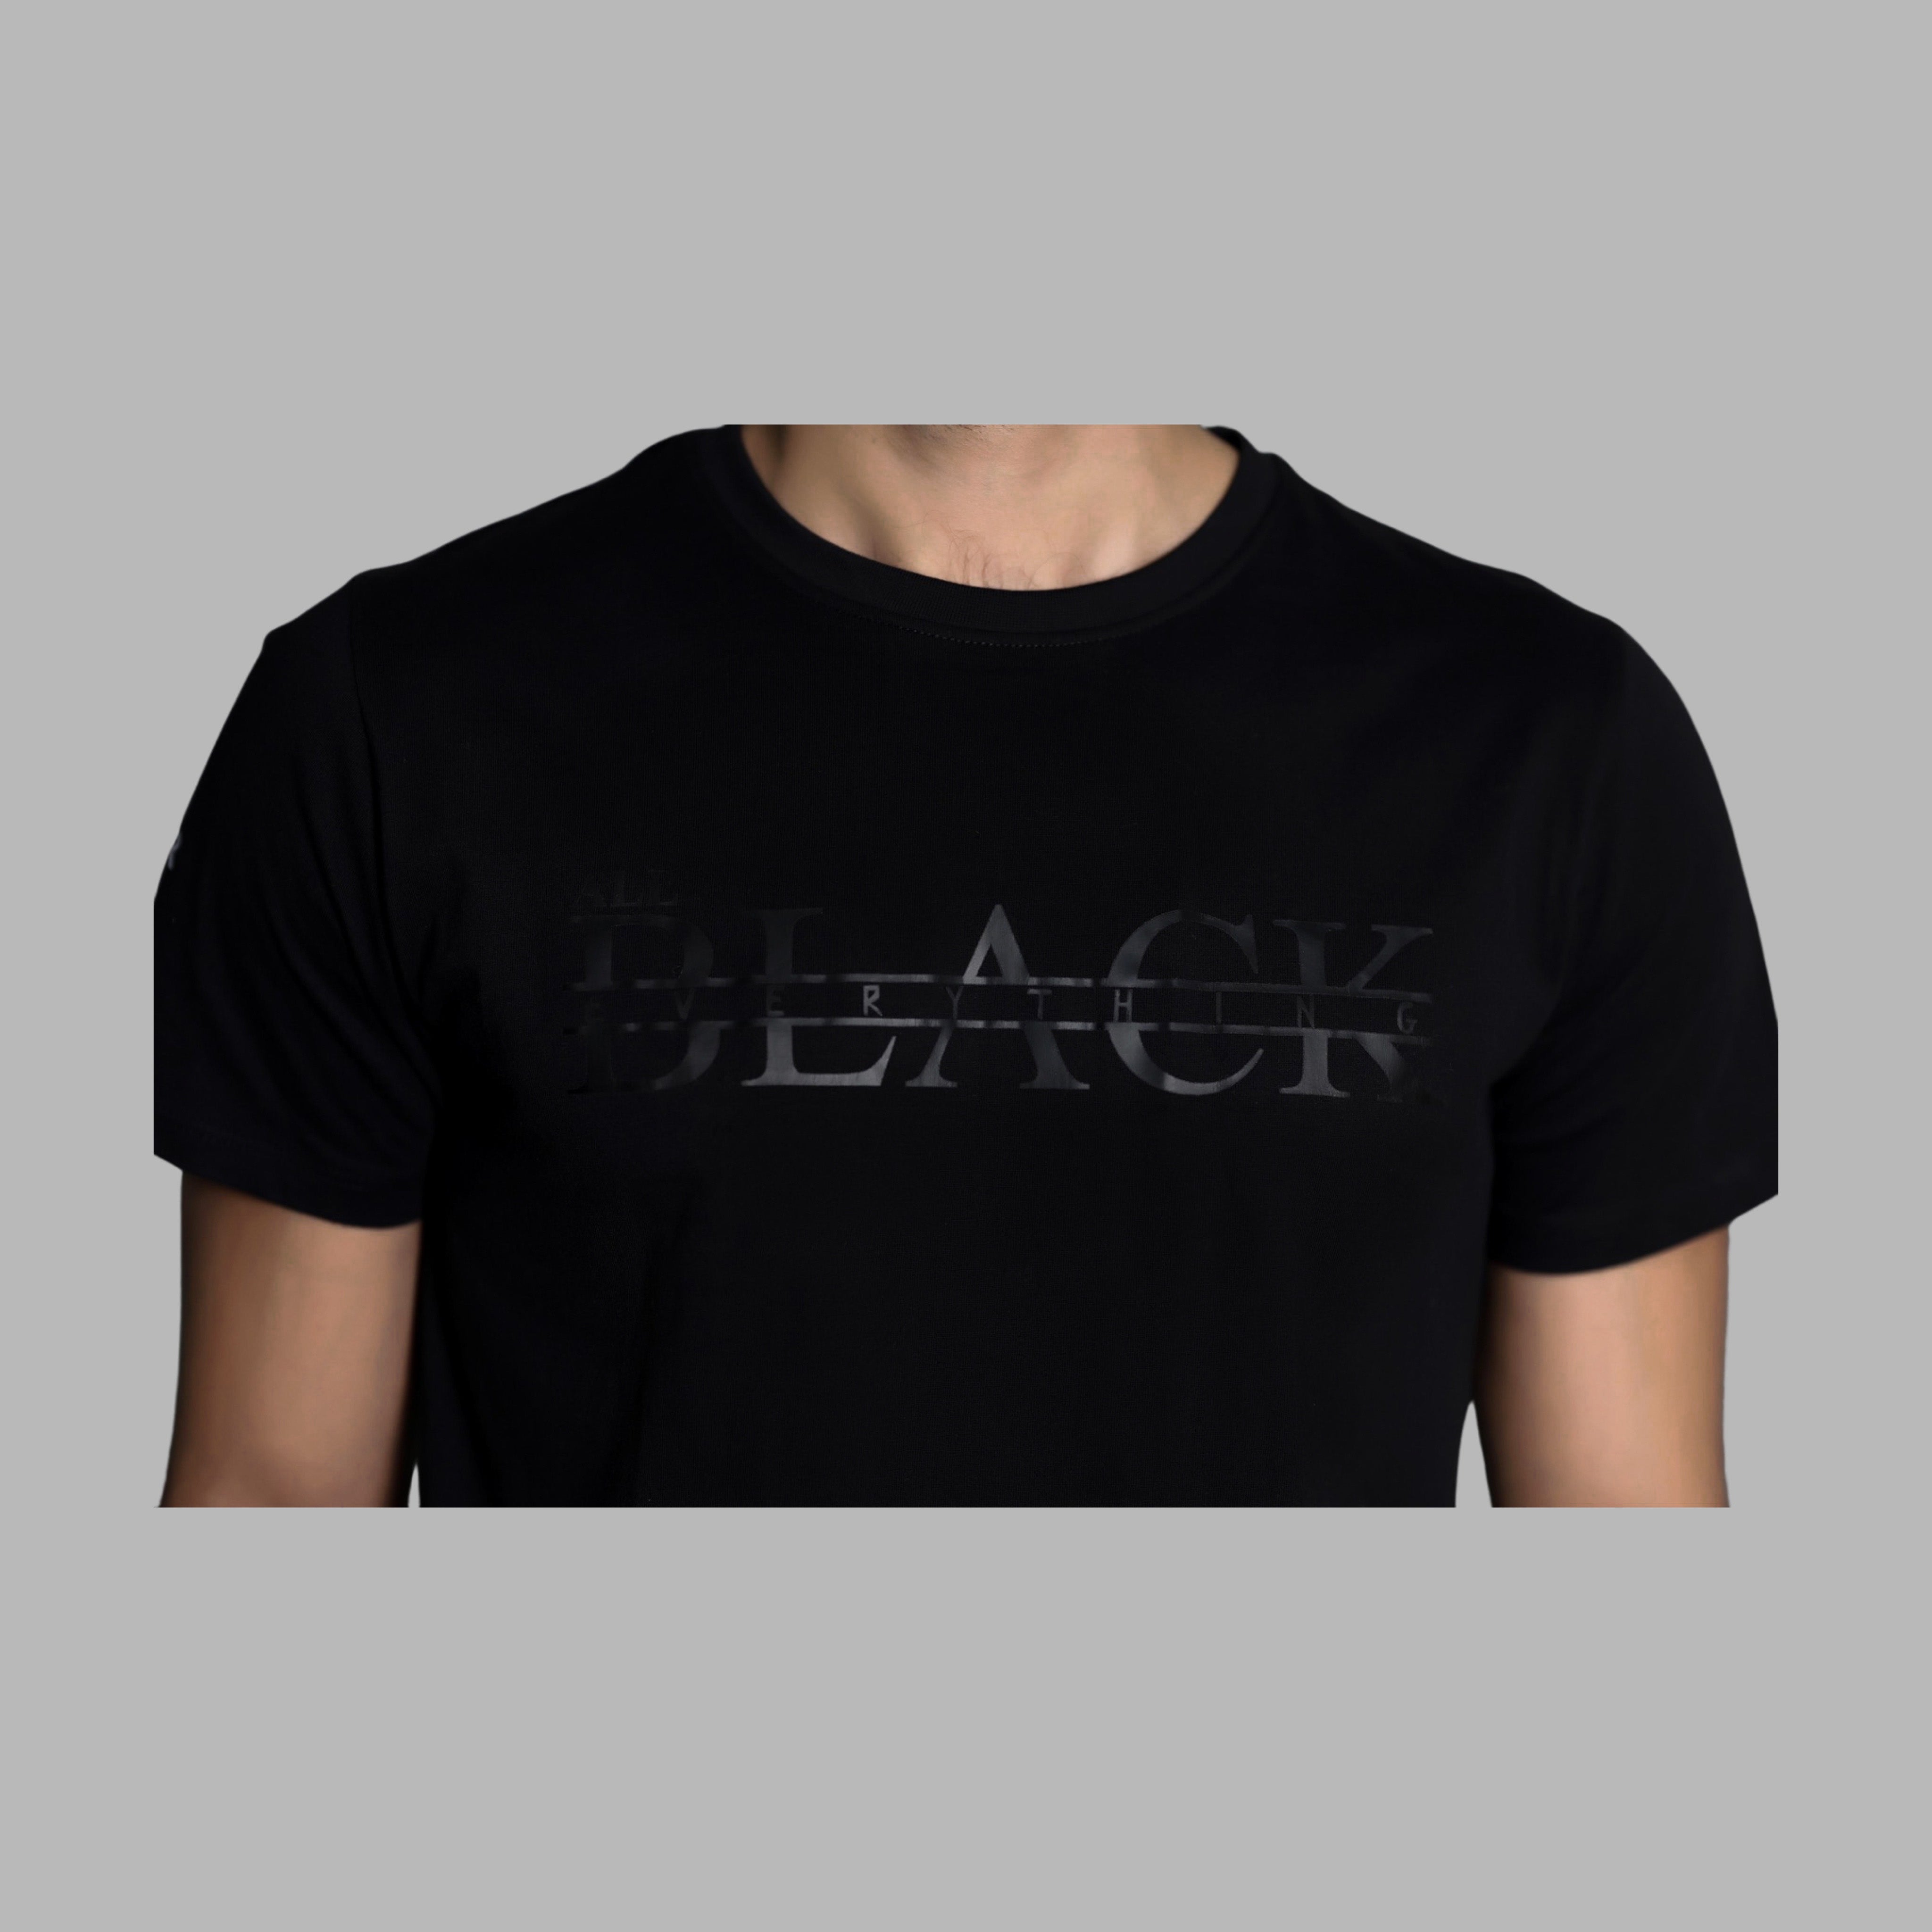 All Black Everything tee